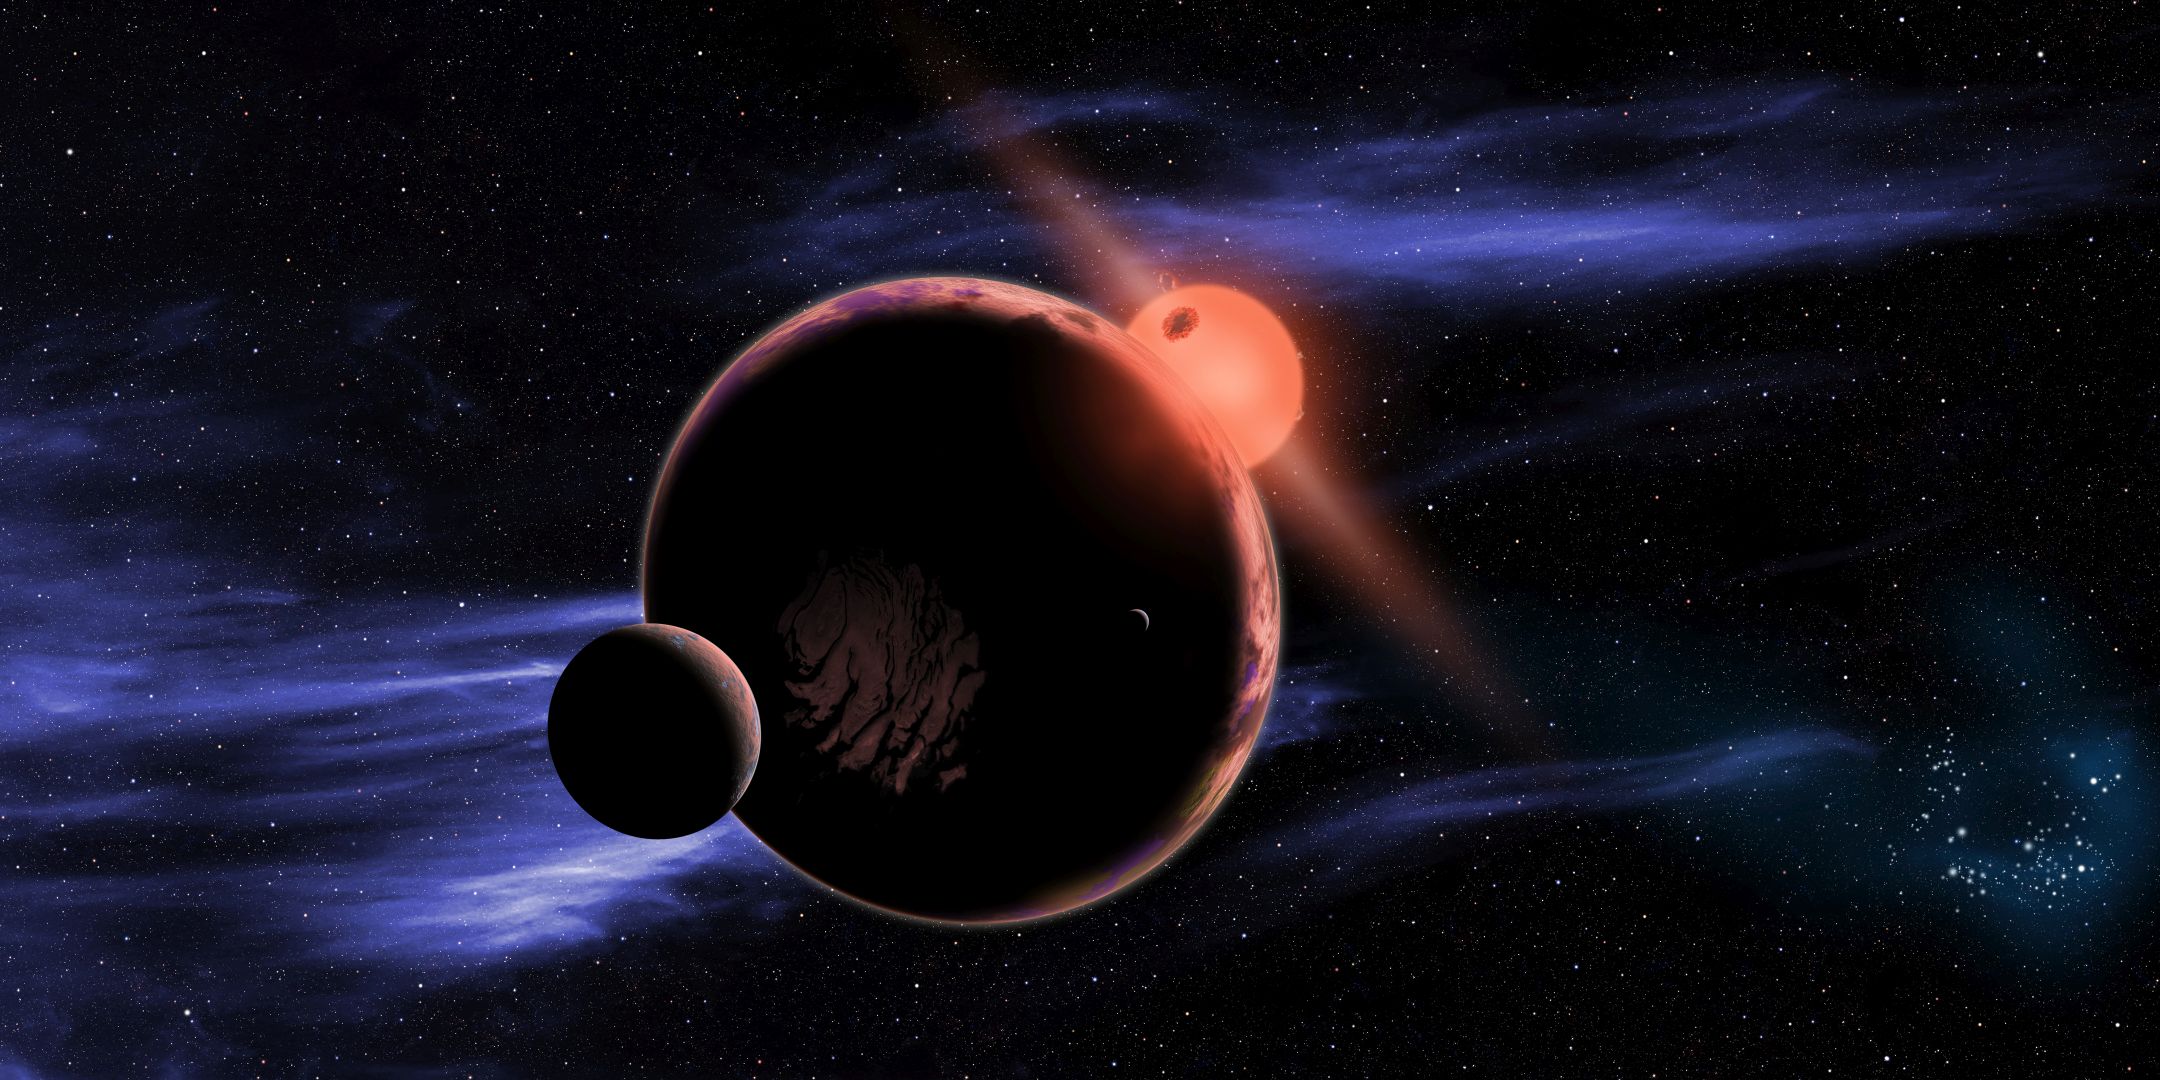 An artist's concept of a hypothetical terrestrial exoplanet with two moons orbiting inside the habitable zone of a red dwarf star. New research has shown that such planets could under the right conditions generate their own magnetic field, which could render them potentially habitable. Image Credit: D. Aguilar/Harvard-Smithsonian Center for Astrophysics